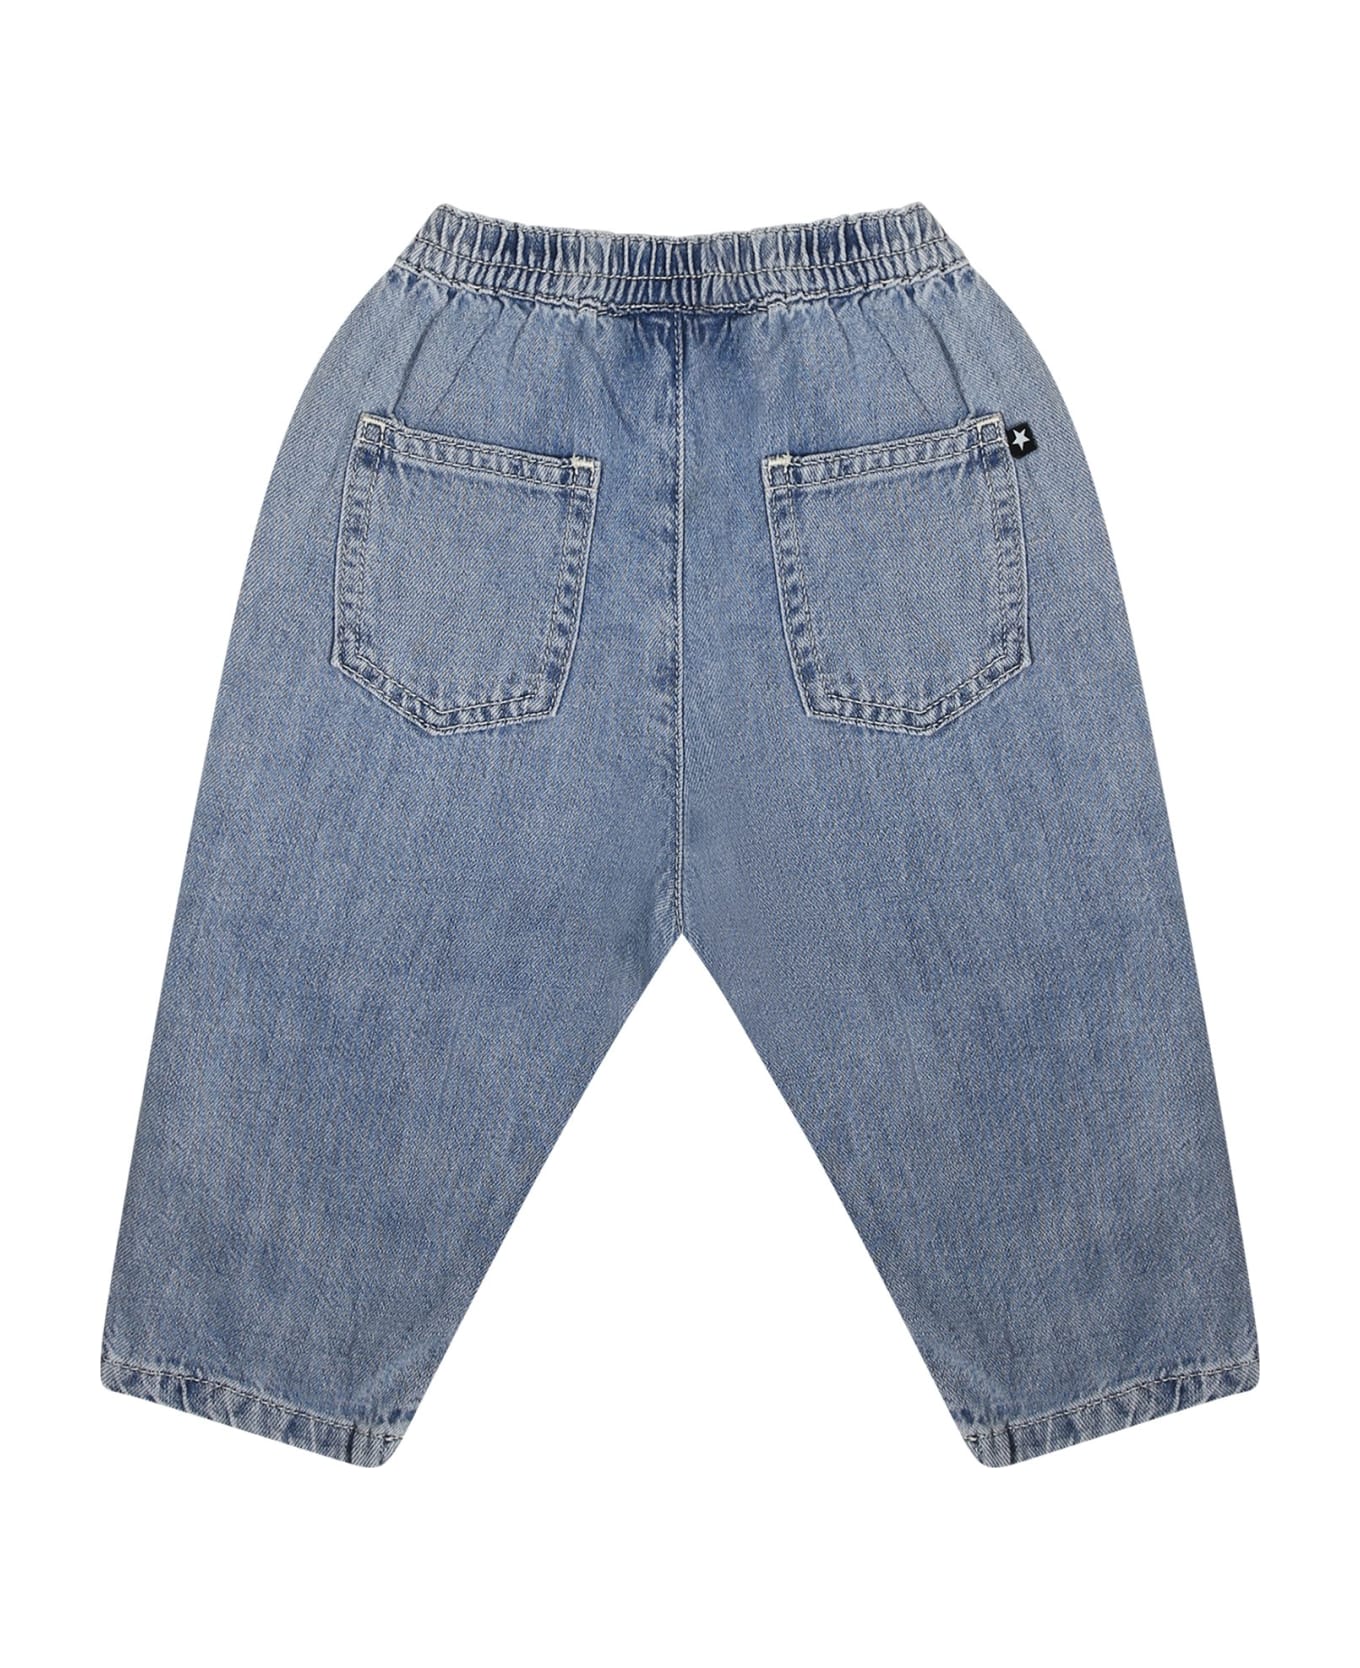 Molo Blue Jeans For Baby Boy With Smiley Face - Denim